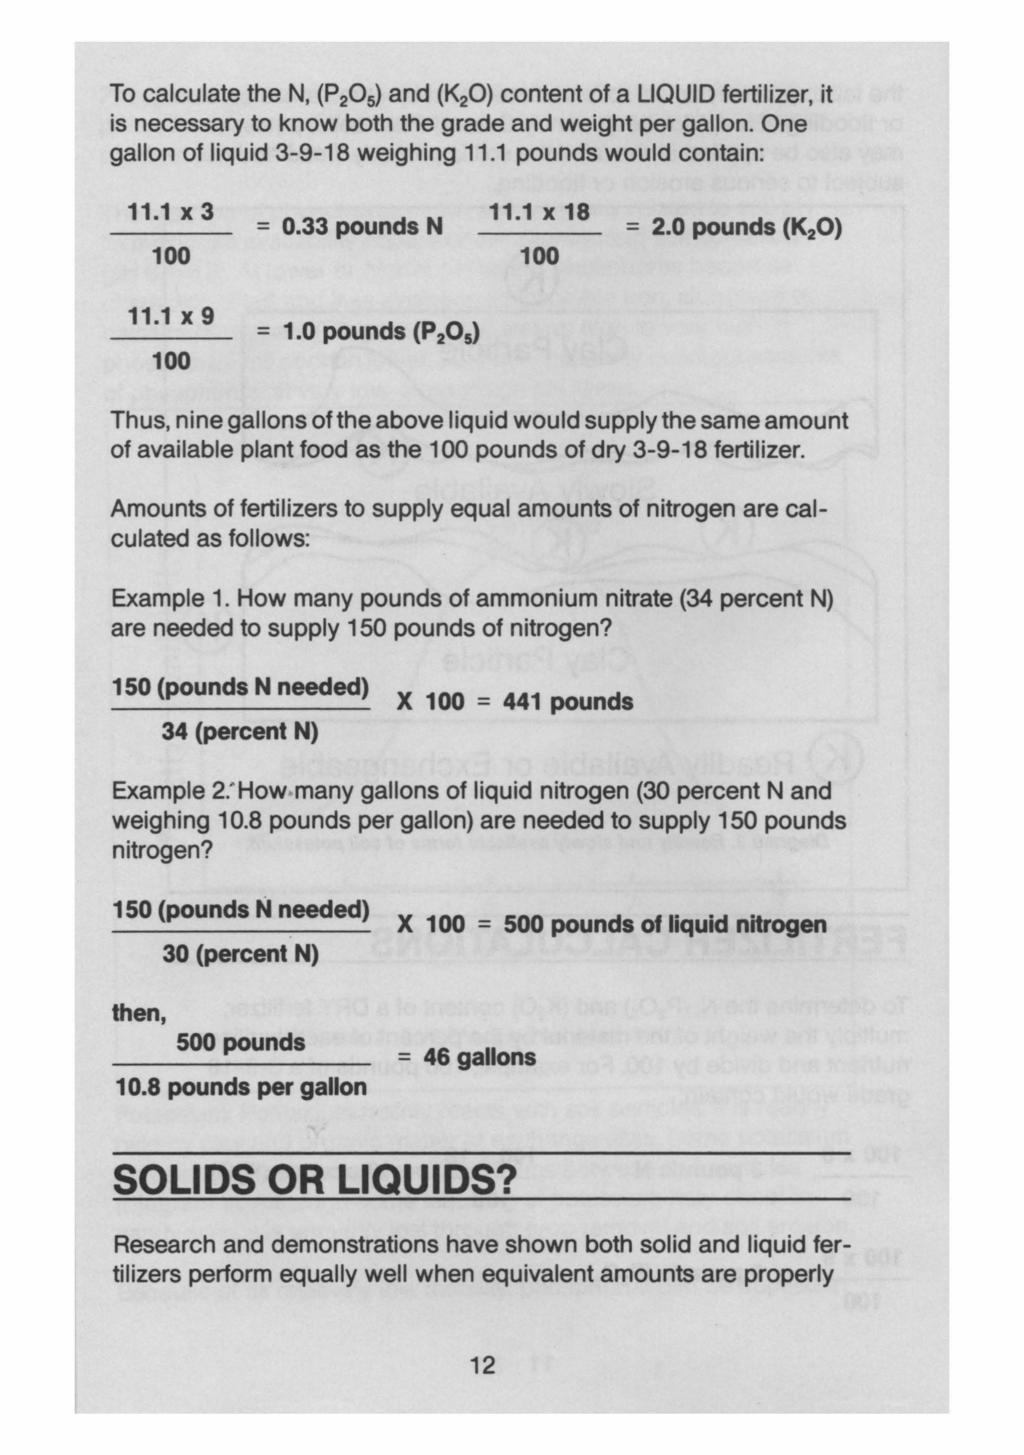 To calculate the N, (P 2 0 5 ) and (K 2 0) content of a LIQUID fertilizer, it is necessary to know both the grade and weight per gallon. One gallon of liquid 3-9-18 weighing 11.